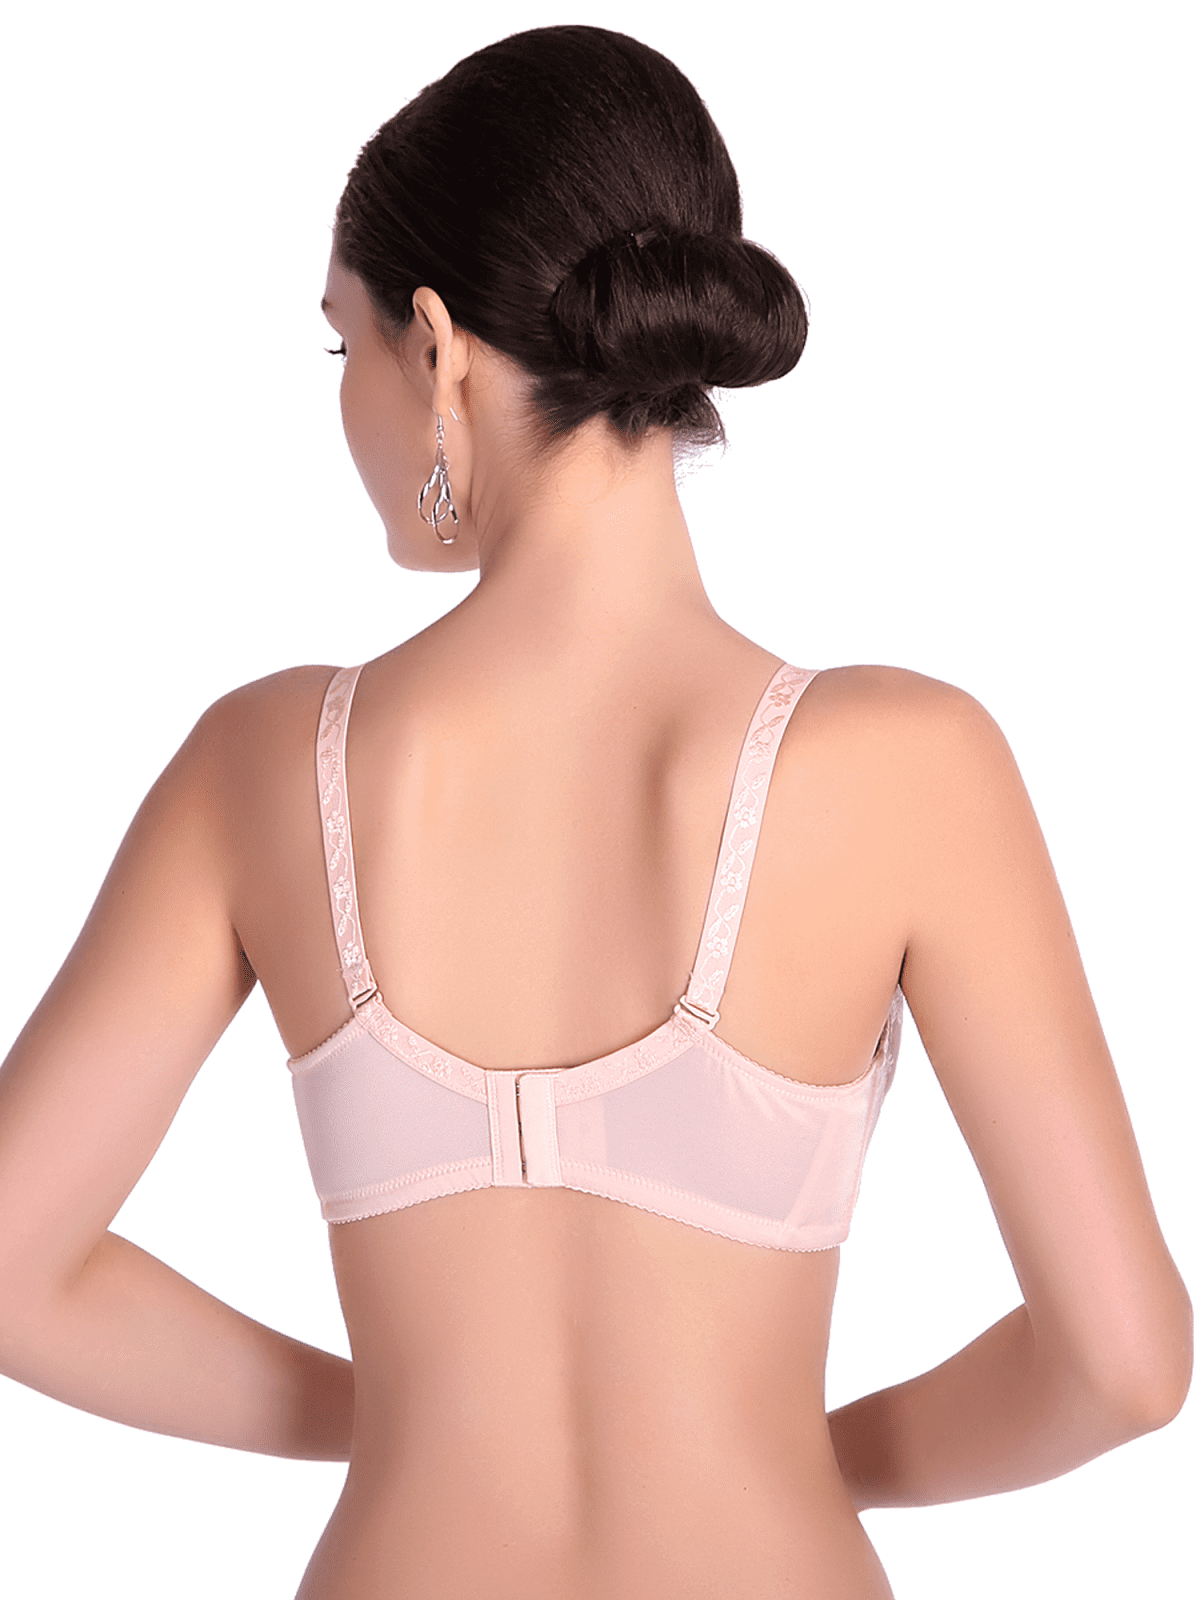 Breast Cancer Lingerie With Zipper And Silicone Inserts For Mastectomy And  Post Plus Size Underwear Pocket From Xieyunn, $10.42